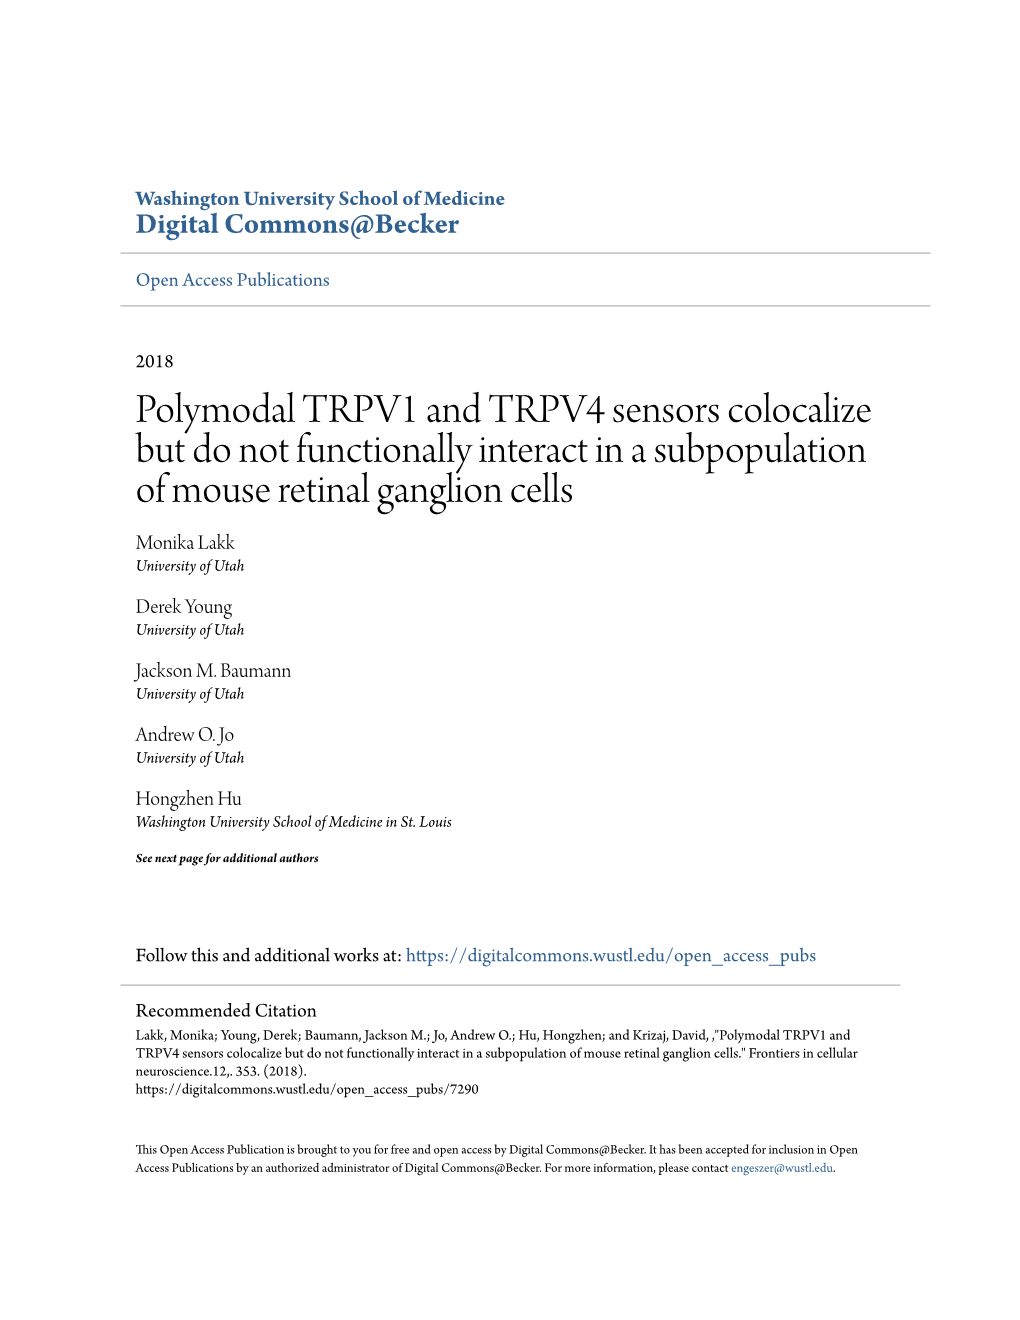 Polymodal TRPV1 and TRPV4 Sensors Colocalize but Do Not Functionally Interact in a Subpopulation of Mouse Retinal Ganglion Cells Monika Lakk University of Utah